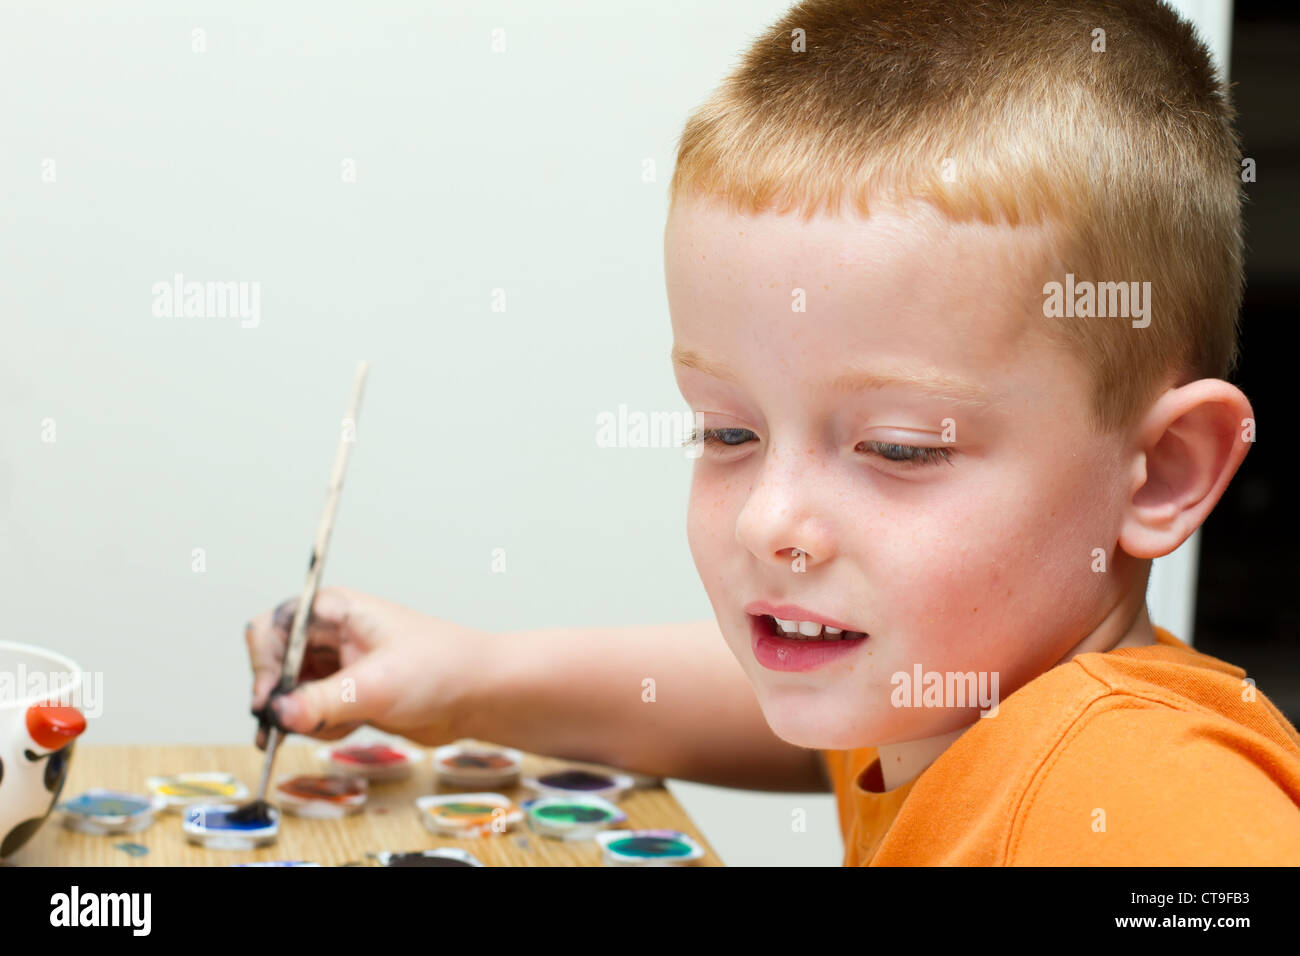 young boy painting a picture with a paintbrush Stock Photo